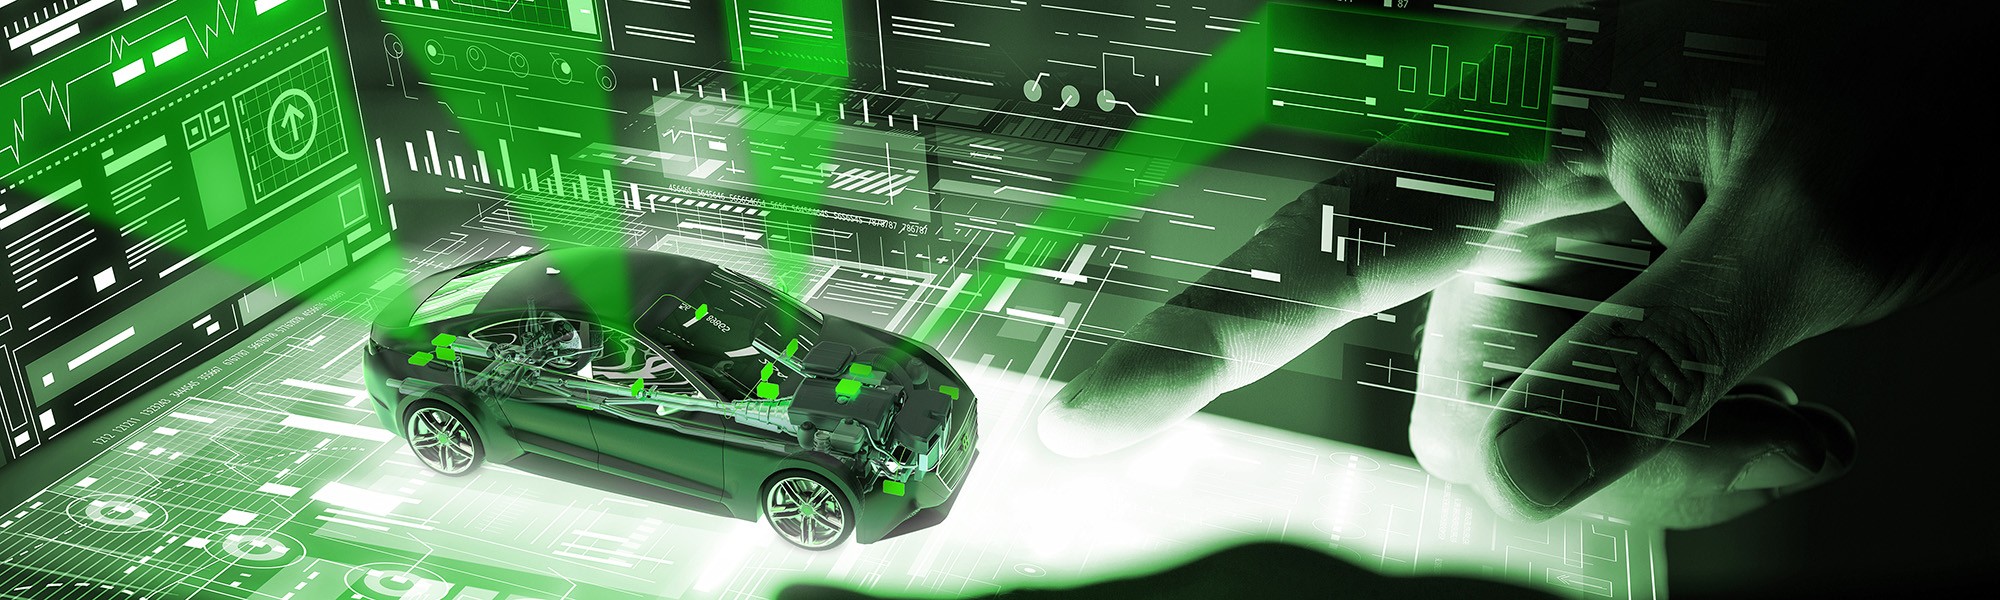 Connected car engineering services: Verification and validation